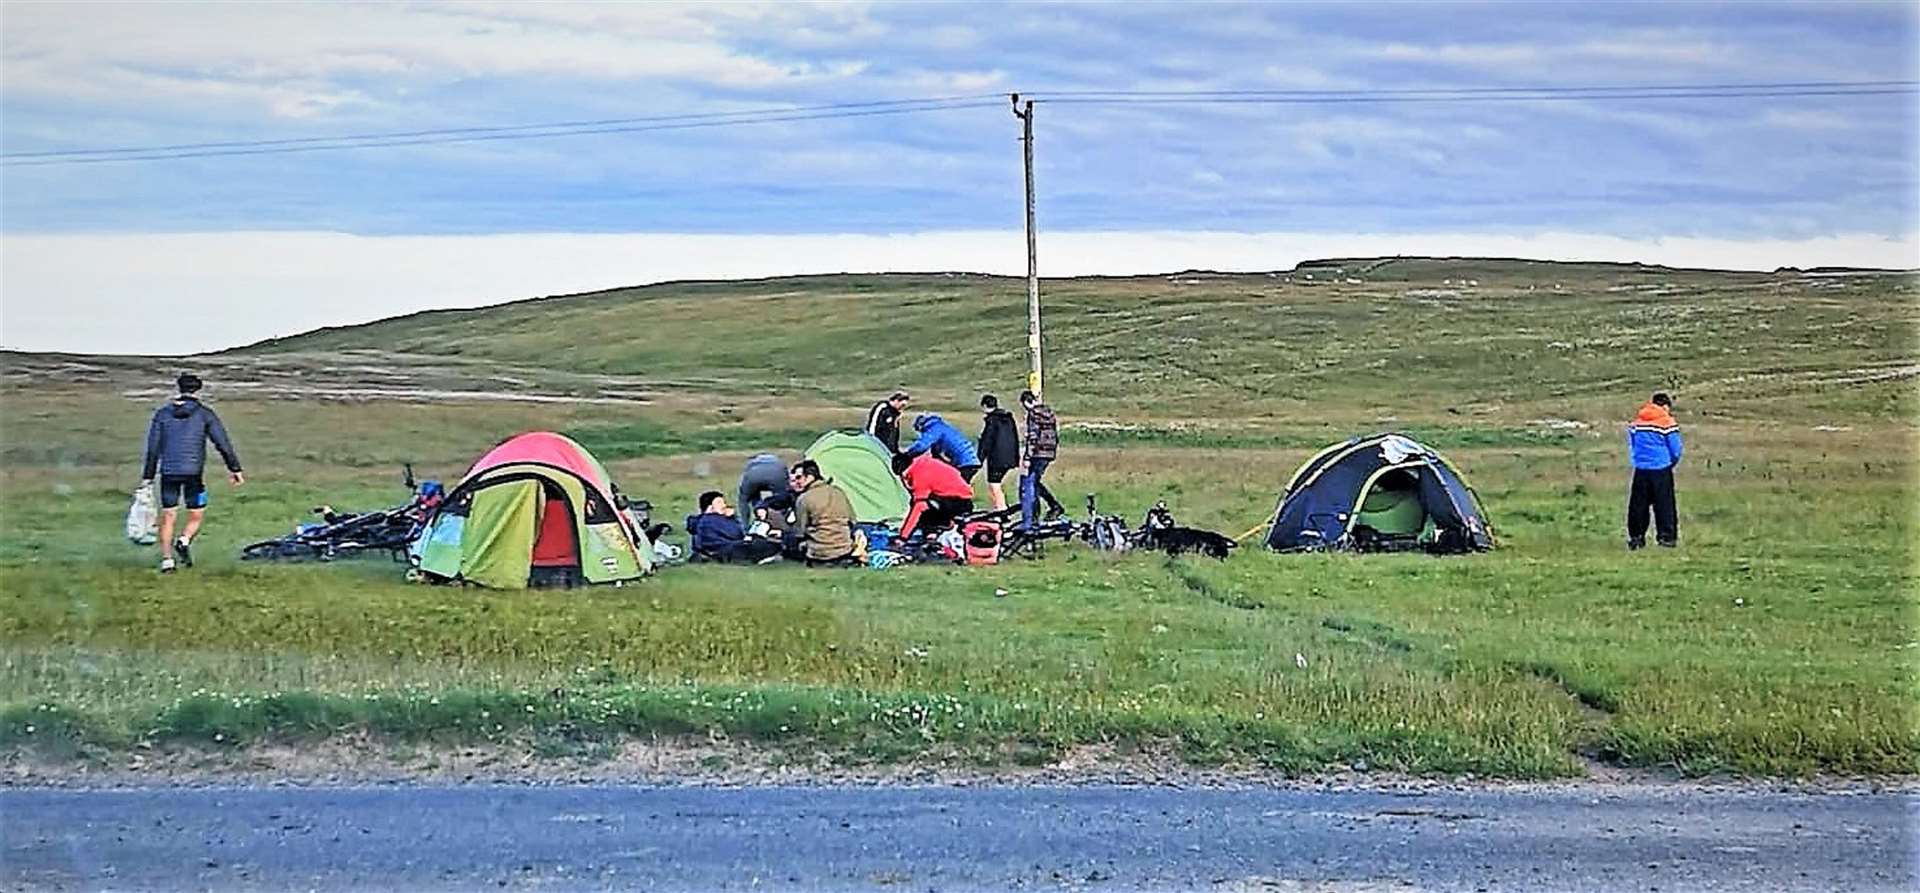 This group of were seen at Sannick where camping is prohibited. Picture: Becky Wymer